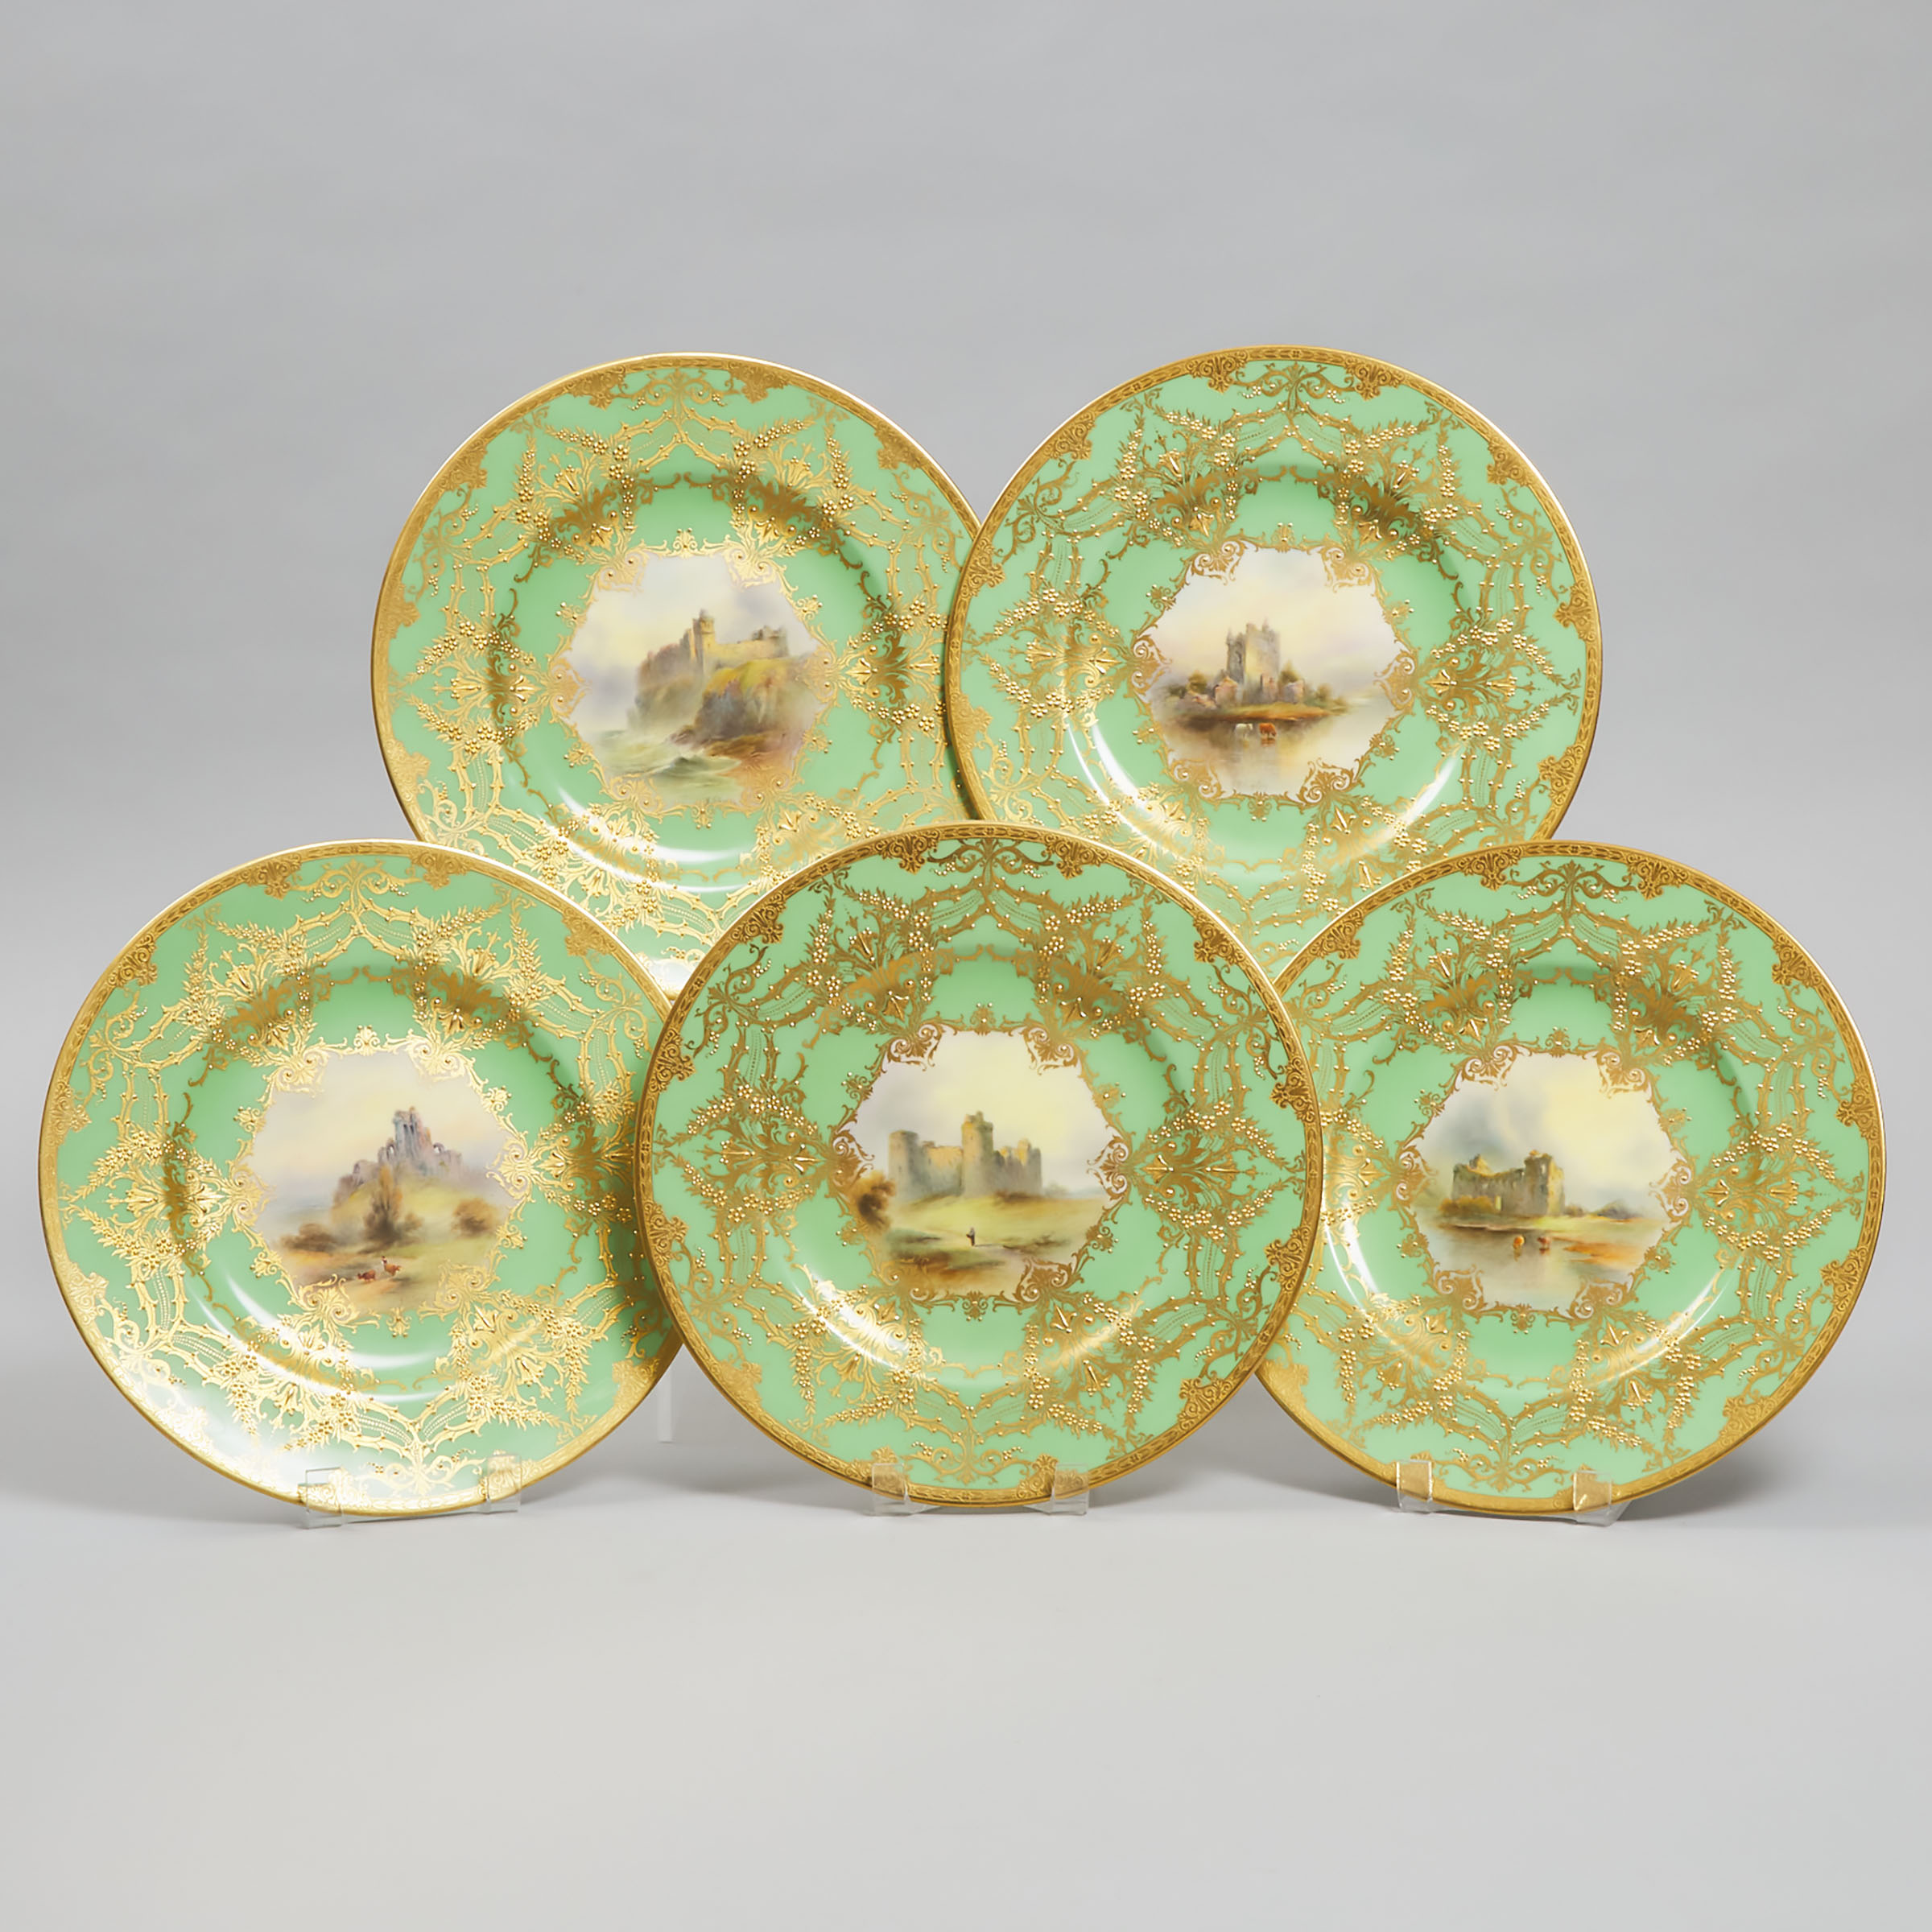 Five Royal Worcester Apple Green Ground Topographical Plates, John Stinton, 1930